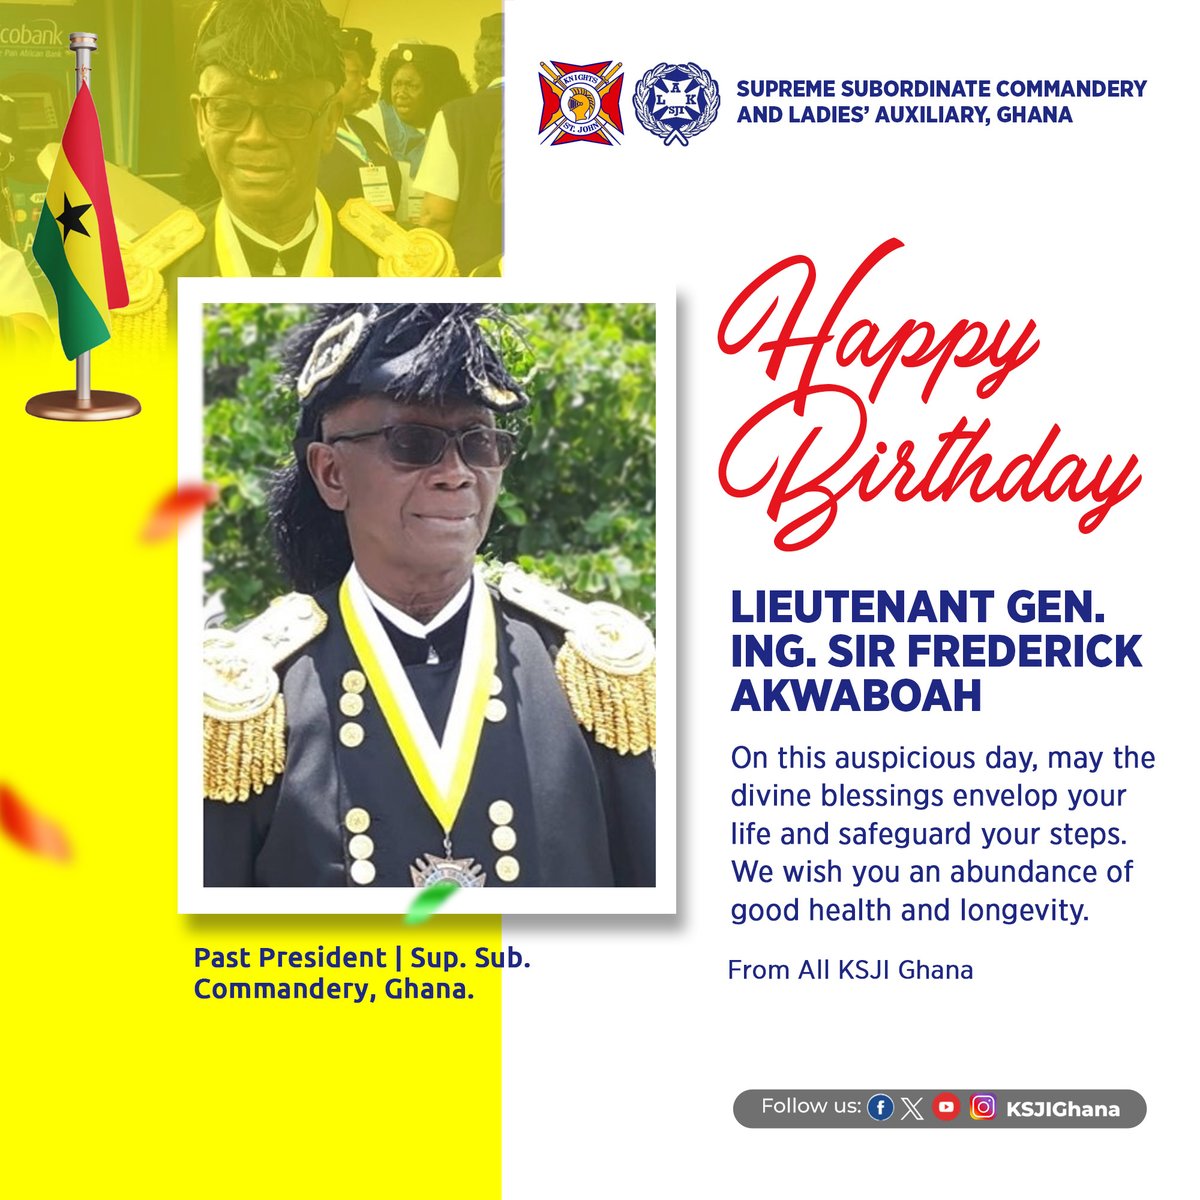 Join us in celebrating Lieutenant General Ing. Sir Frederick Akwaboah as he marks another year today!

May this special day be filled with blessings, joy, and the warmth of God's love.

Greetings from your KSJI Family!

#KSJIGhana | #CatholicFaithful | #ForGodAndCountry